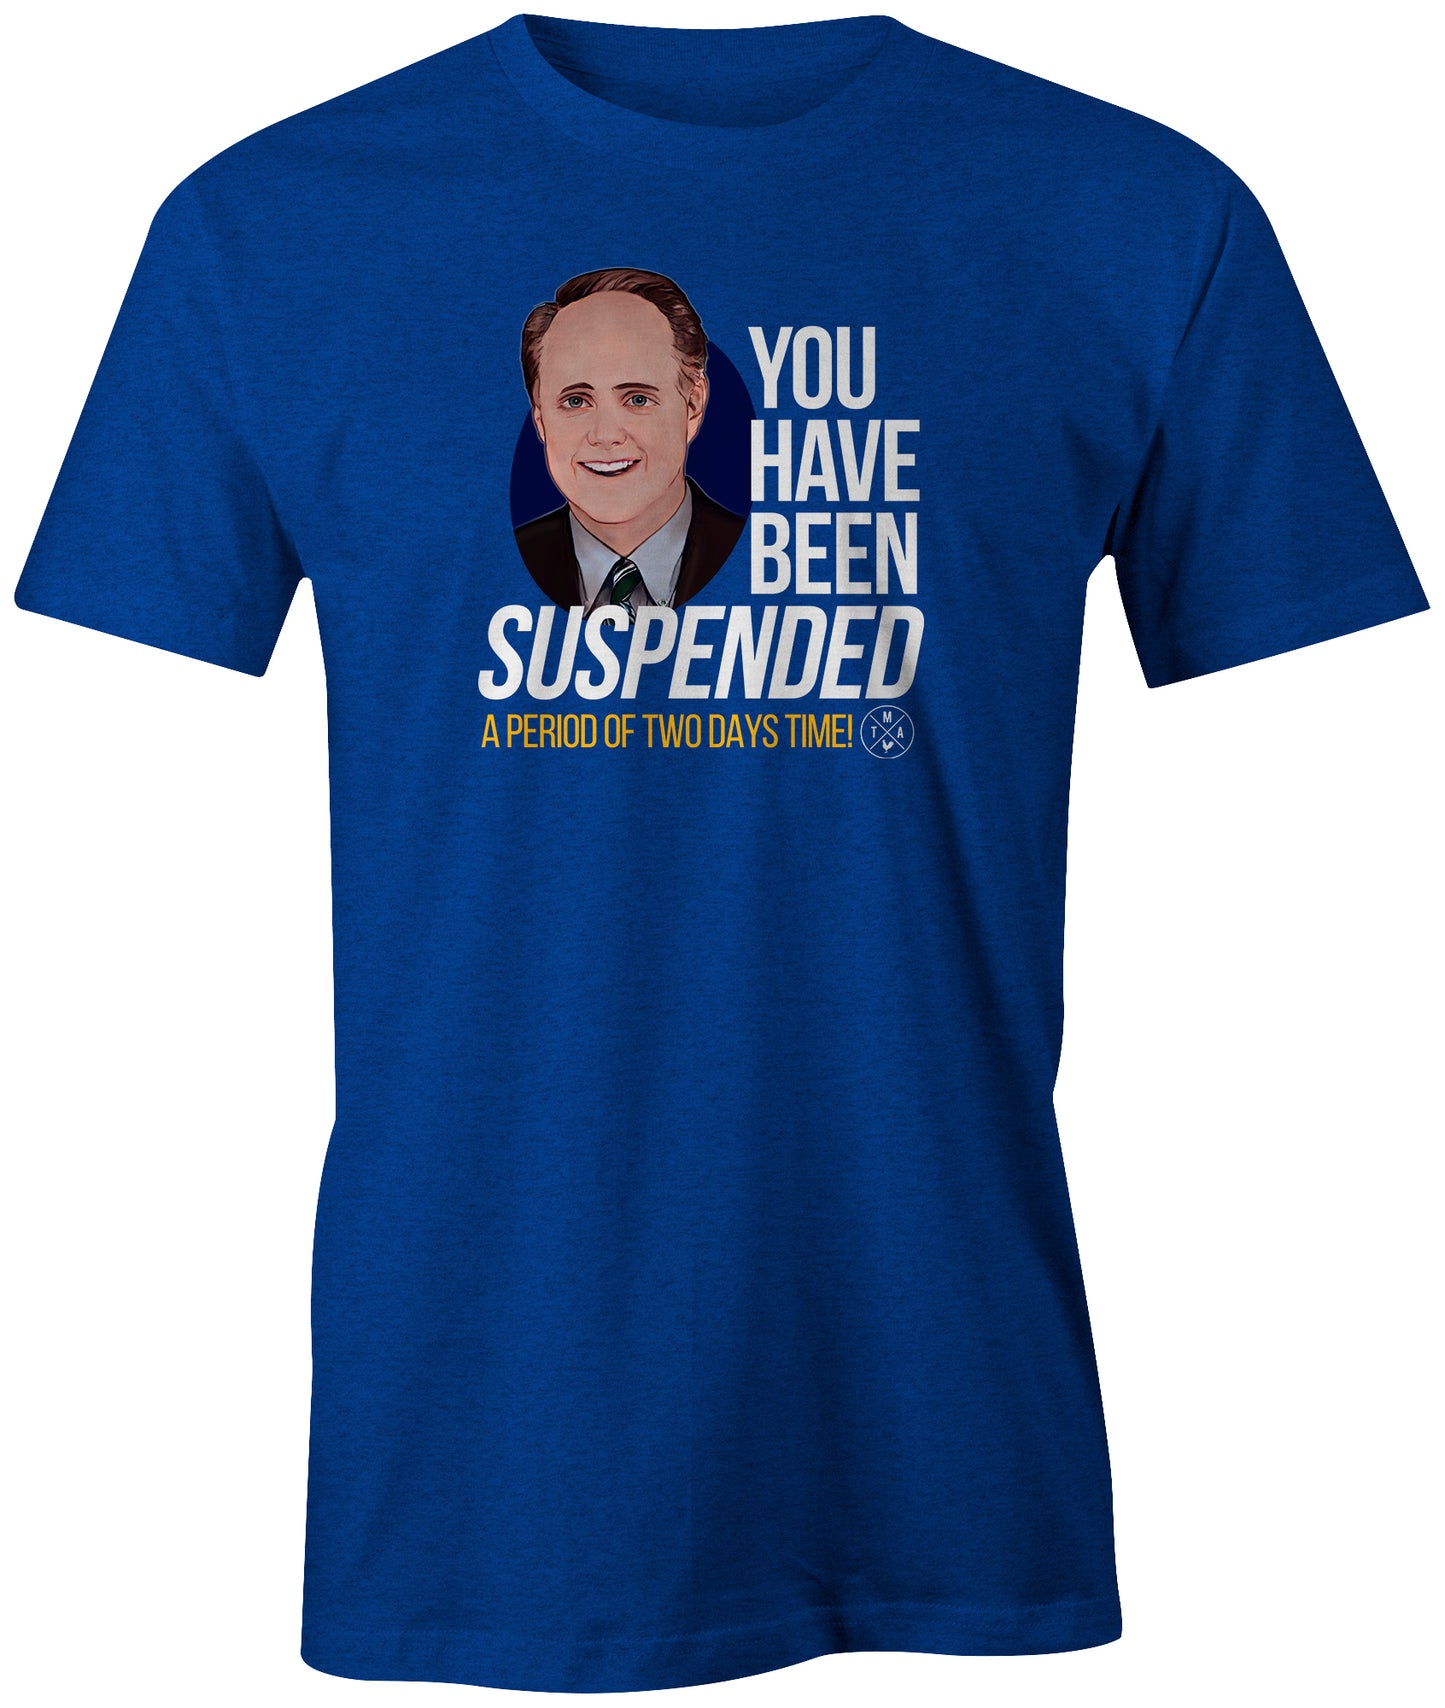 doug vaughn kmov 4 news sports st louis shirt apparel suspended 2 days time logyule tma the morning after cloting appareal arch